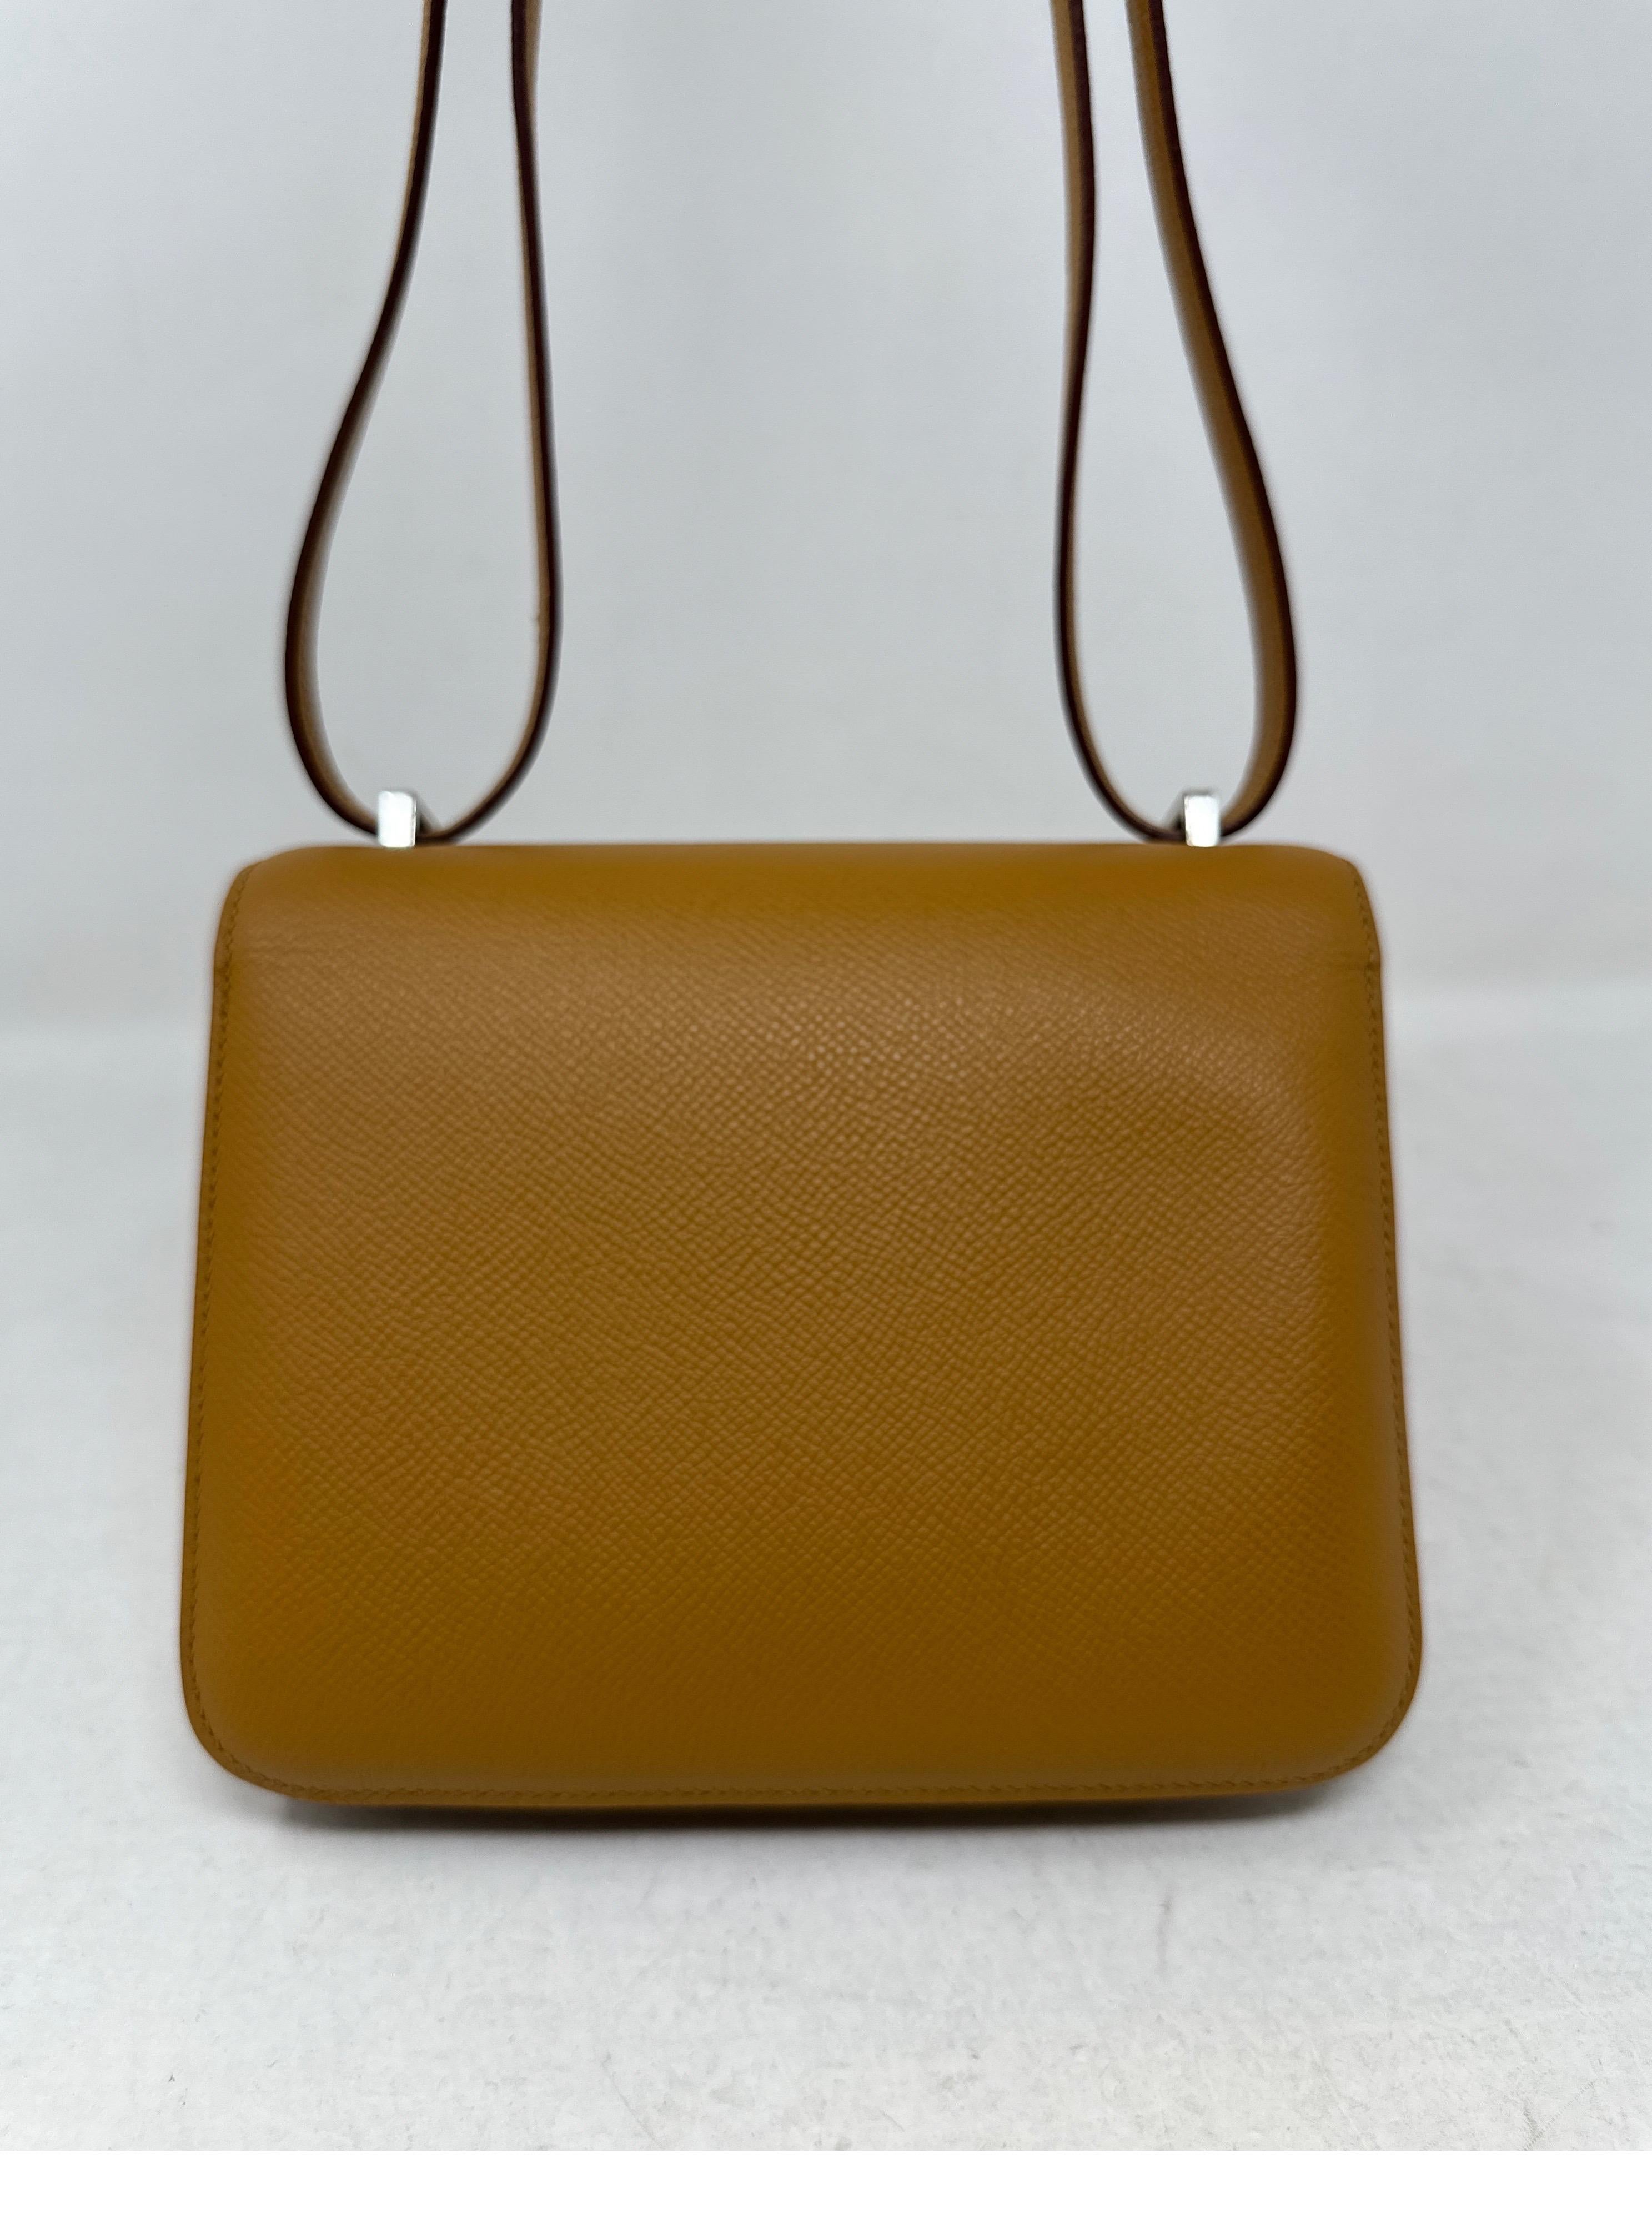 Hermes Gold Constance 18 Bag  In Excellent Condition For Sale In Athens, GA